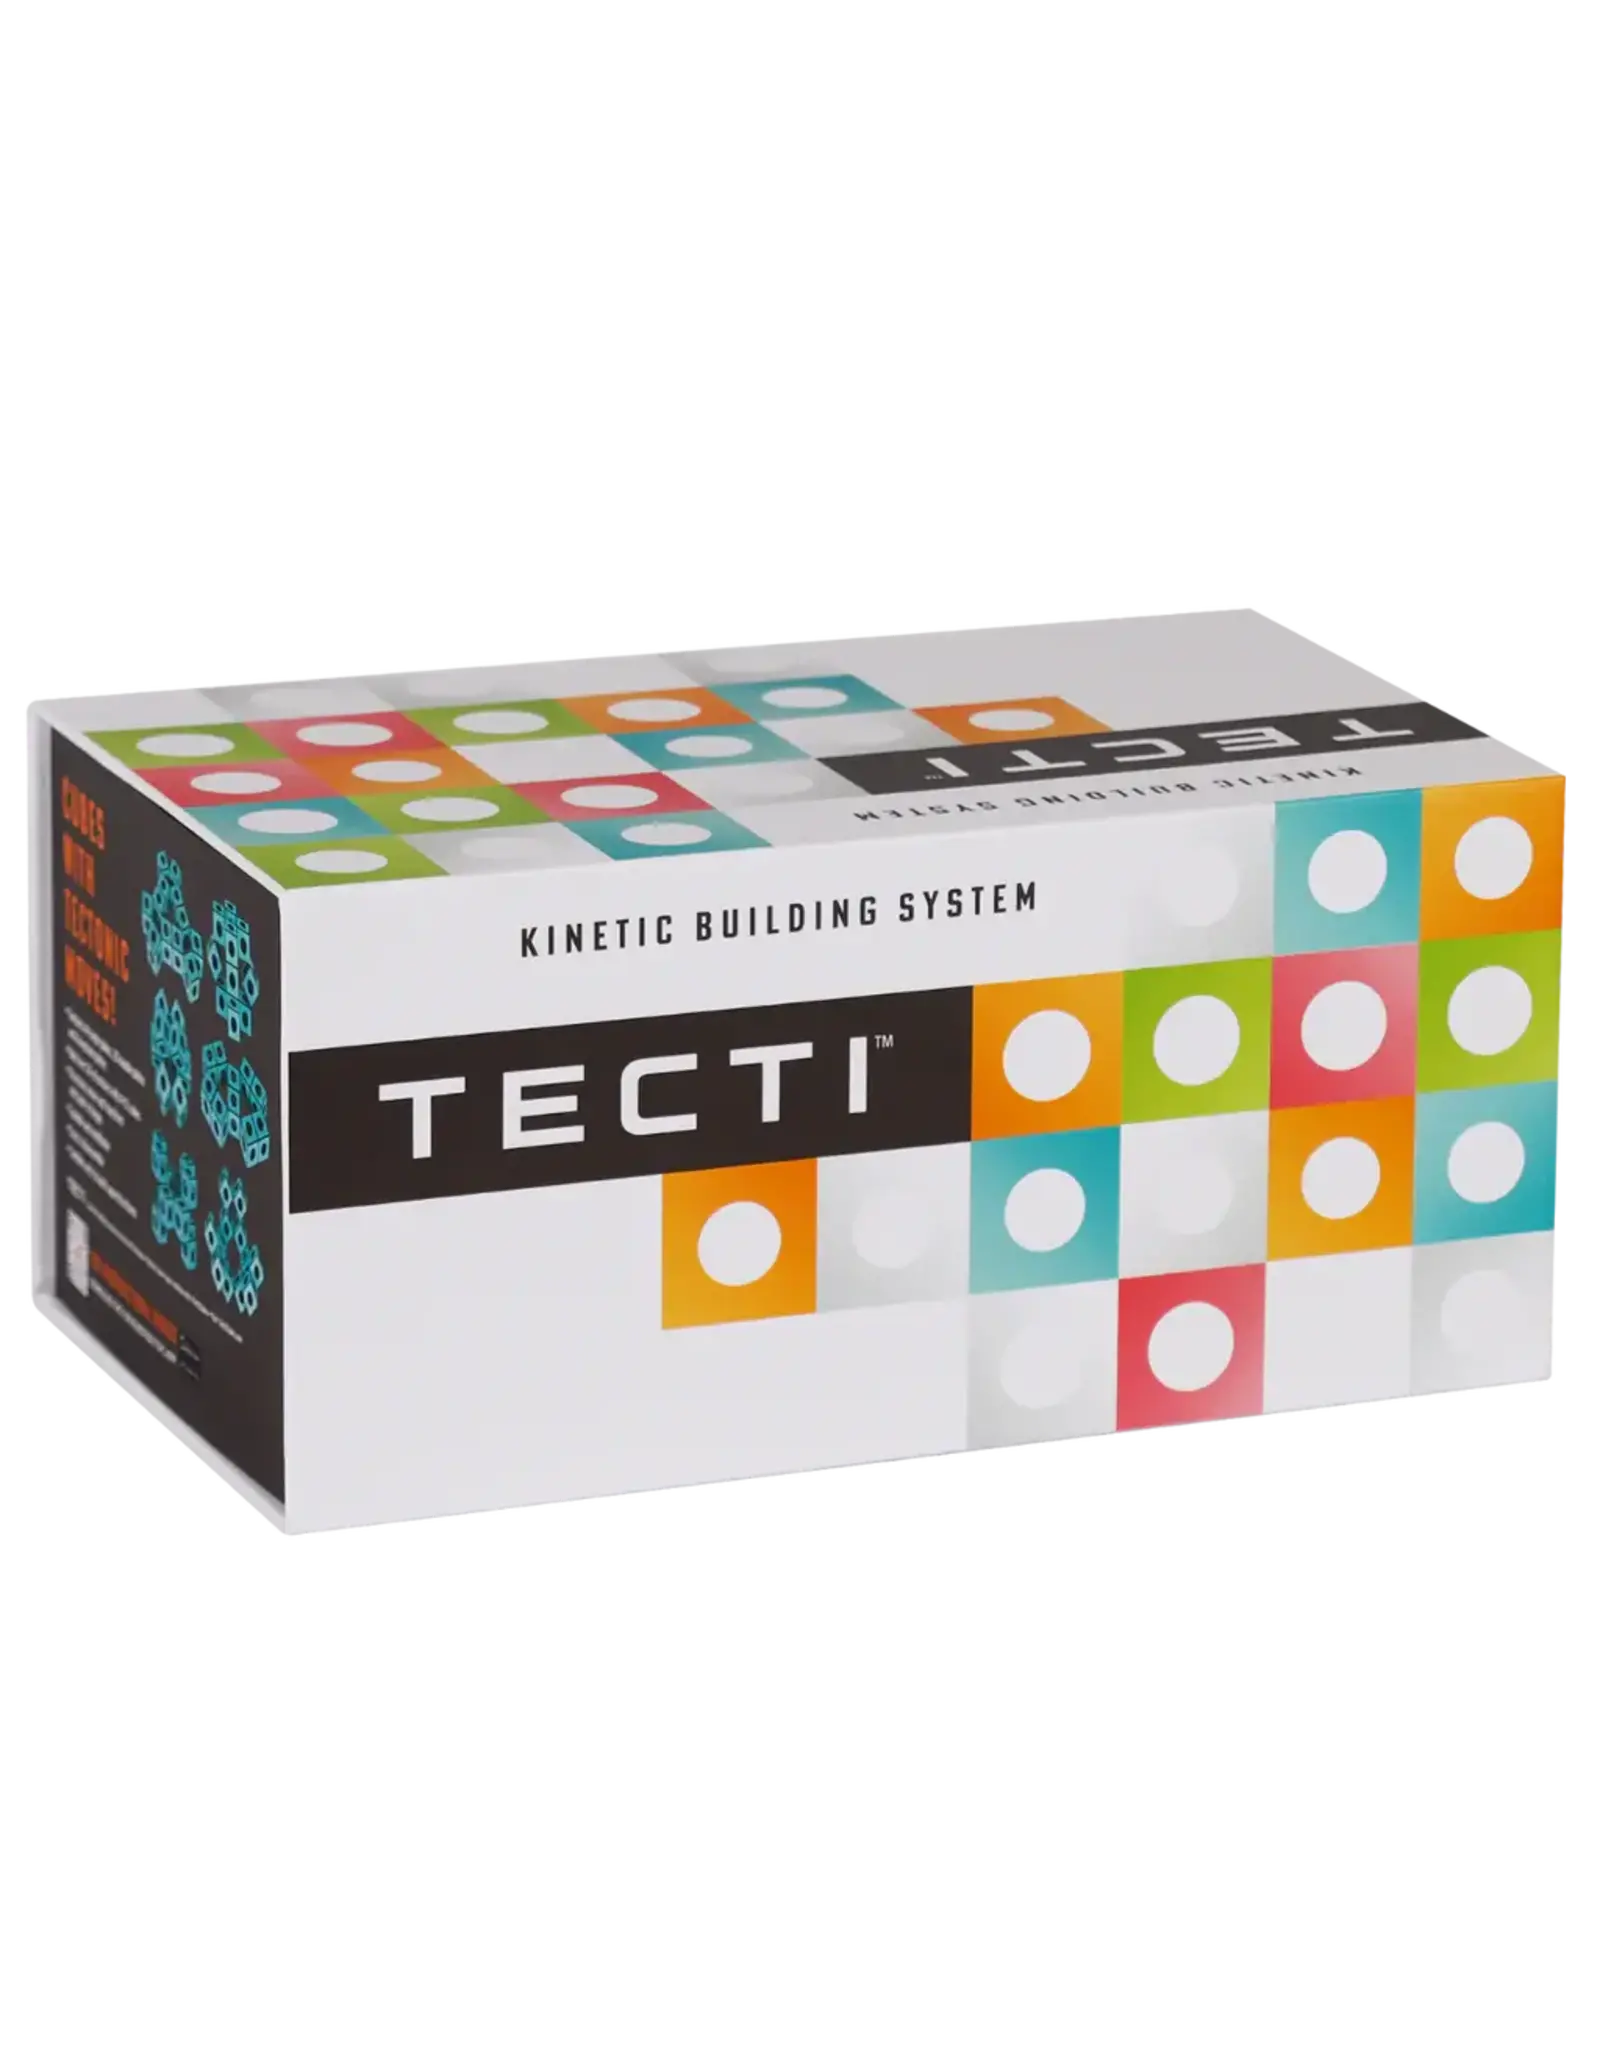 TECTI: The Ultimate Kinetic Building System!